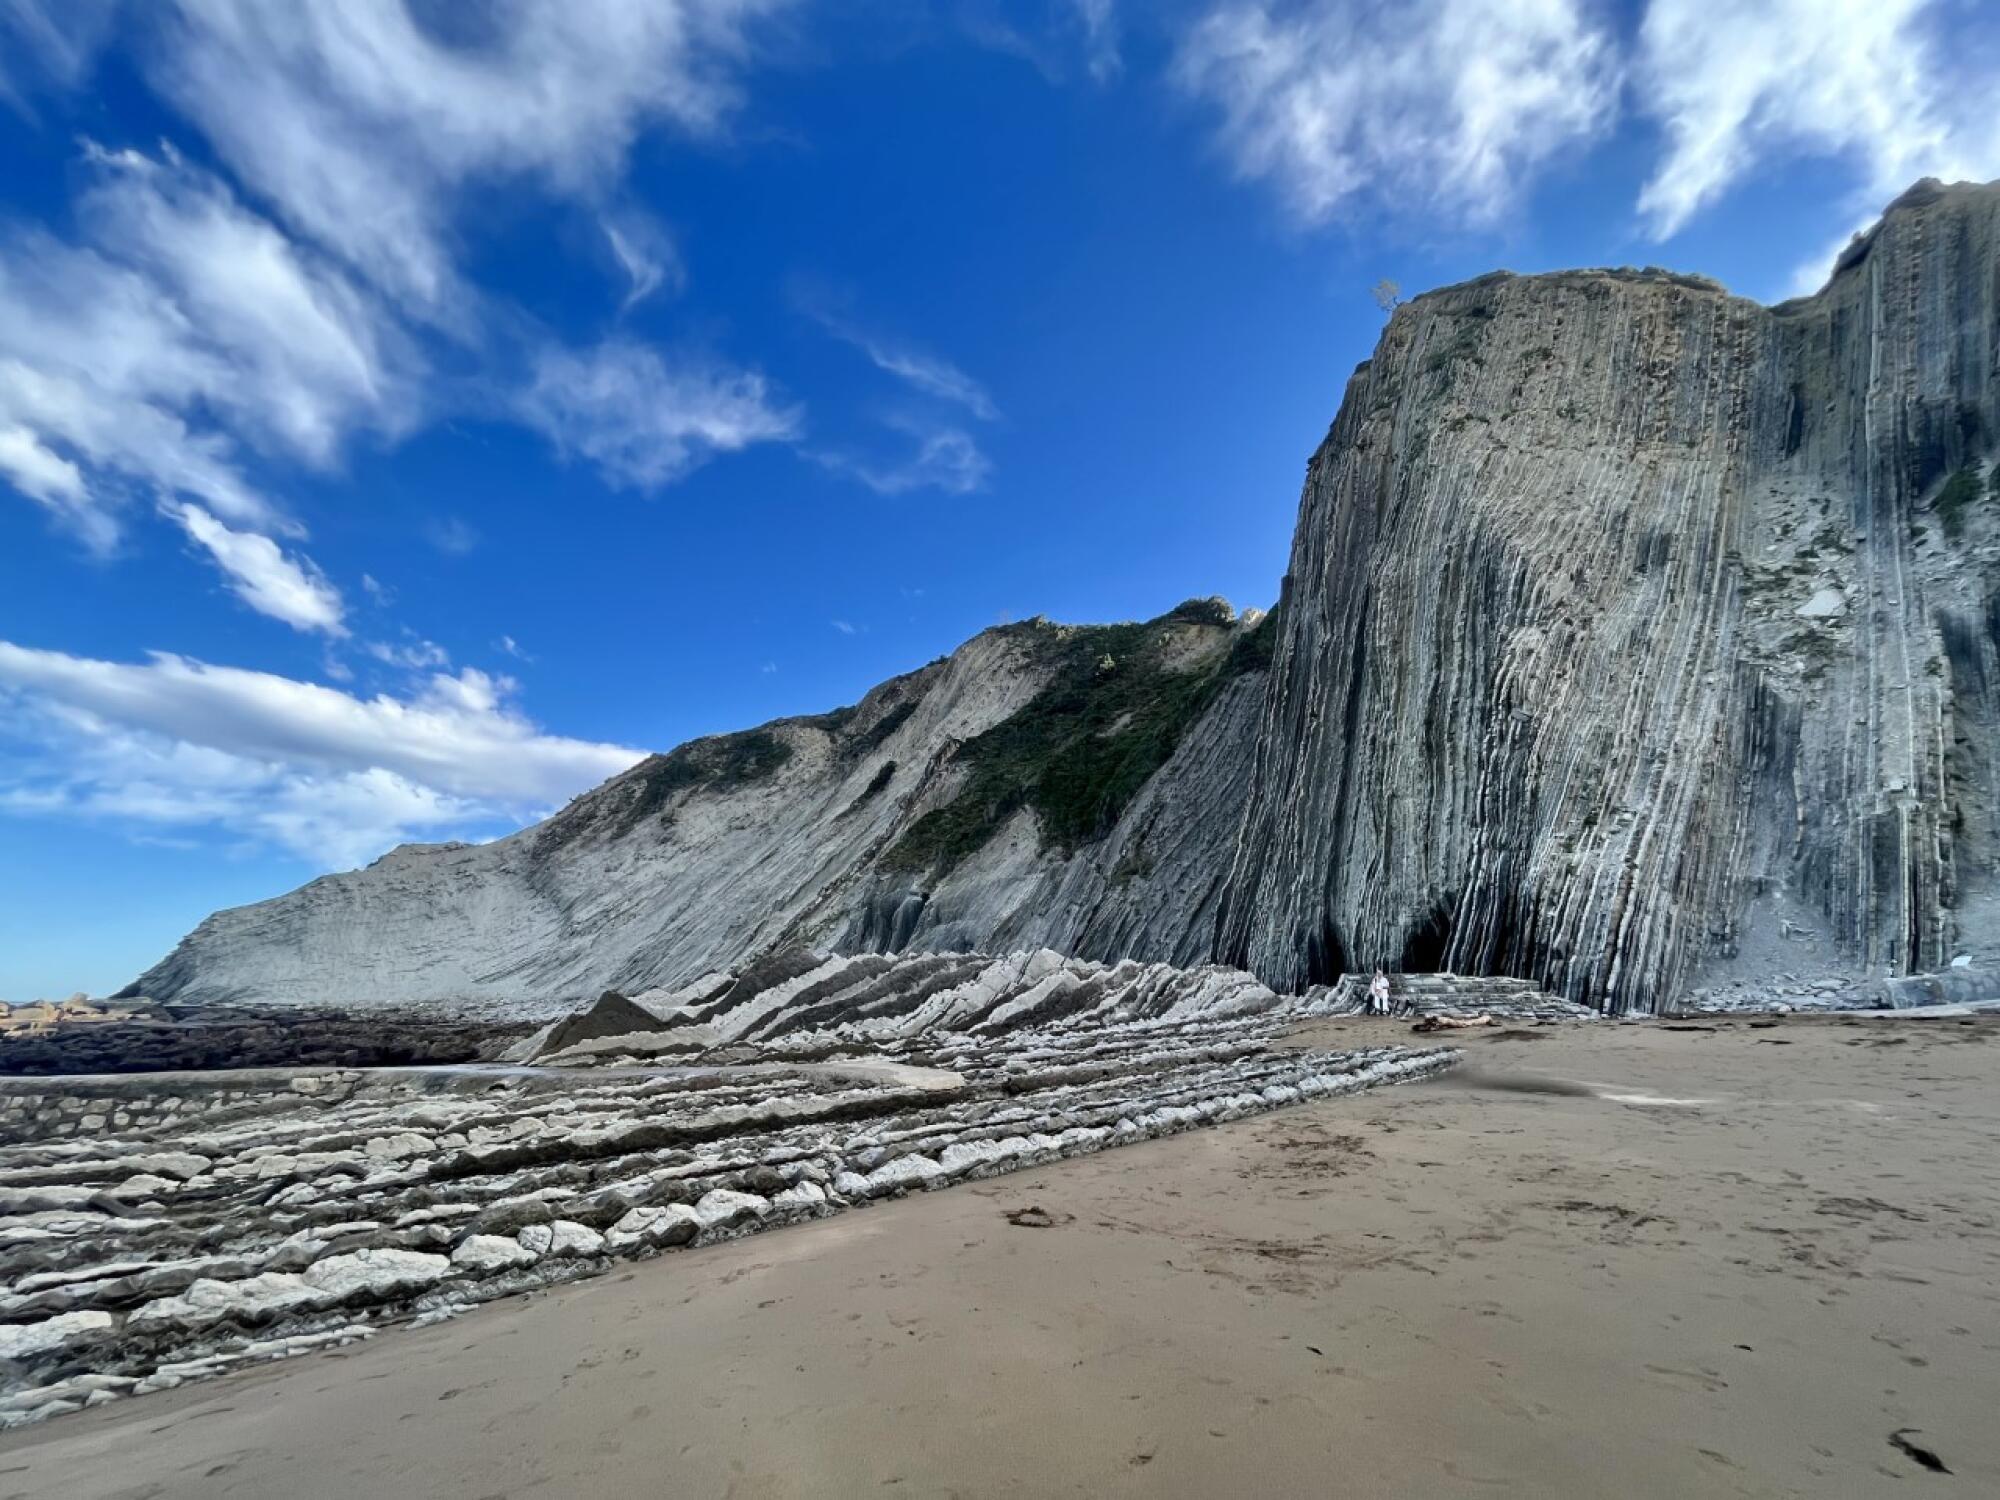 The flysch rock formations at the beach in Zumaia, Spain.